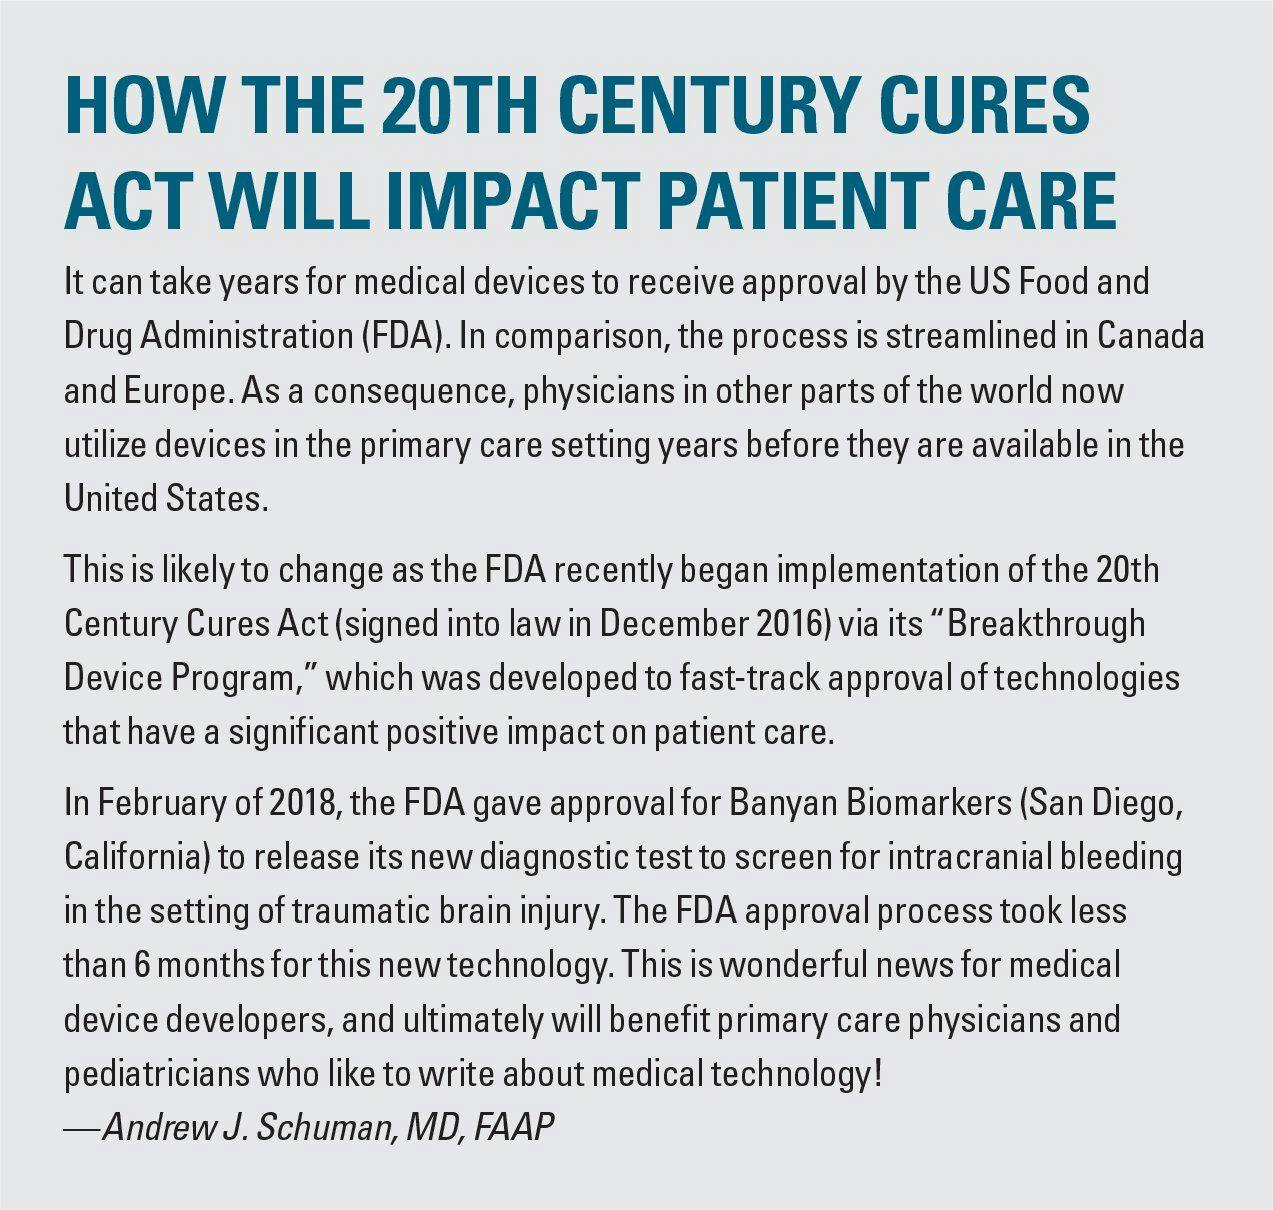 How the 20th Century Cures Act will impact patient care